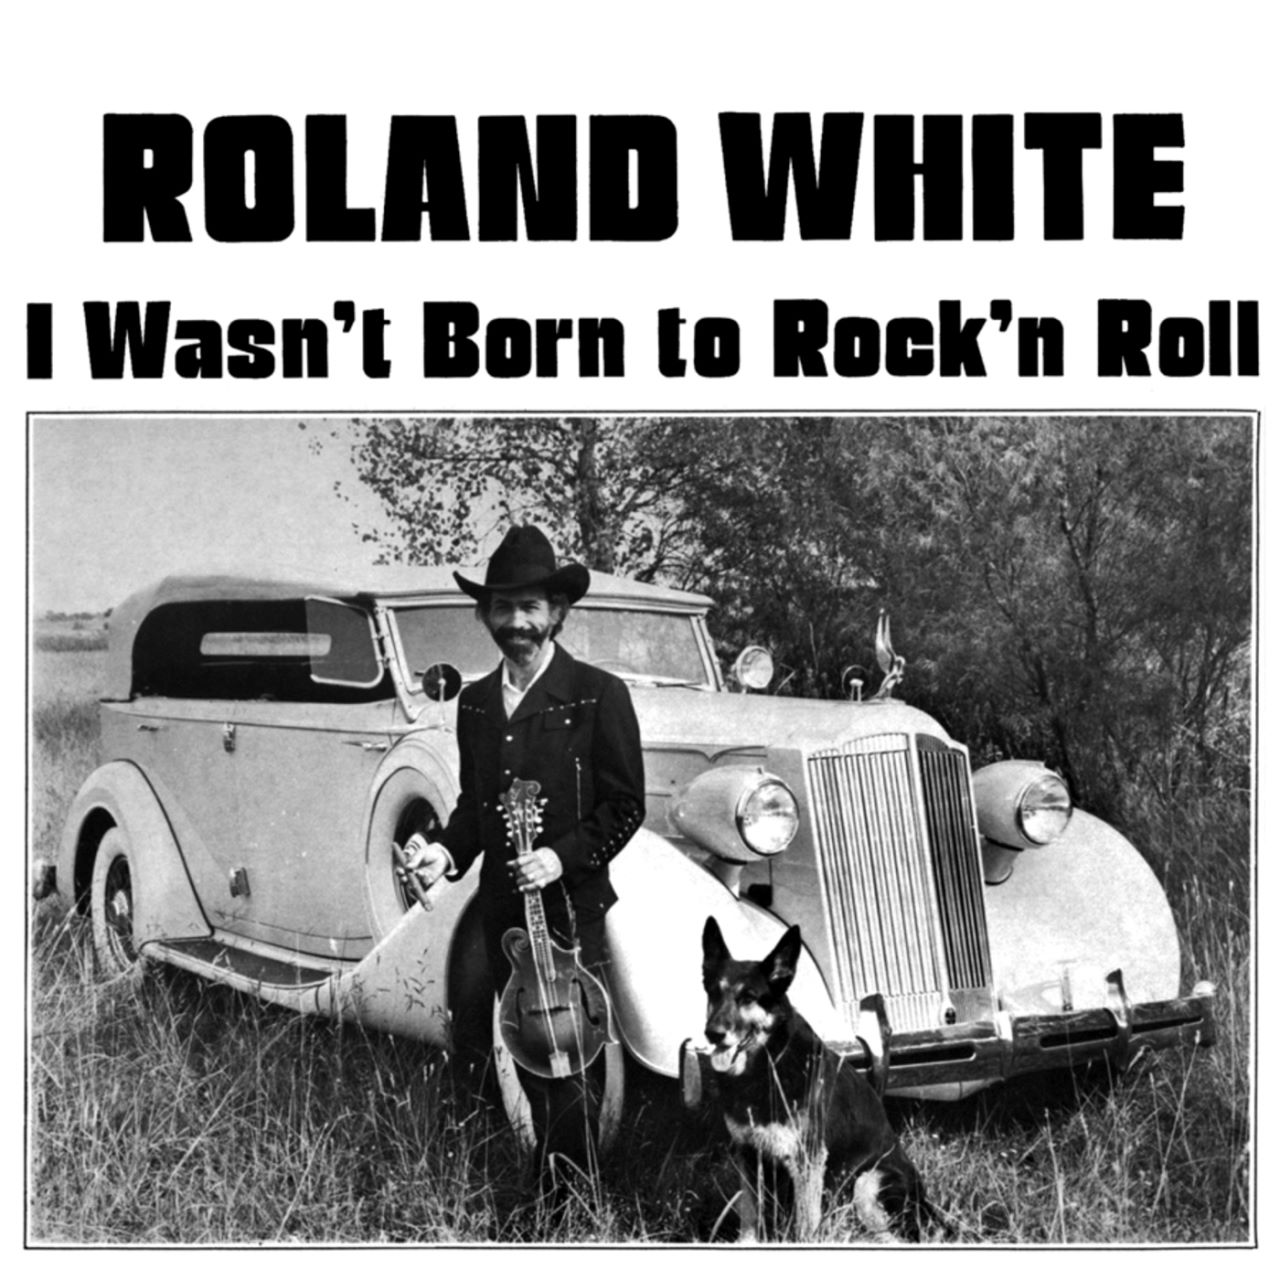 Roland White - I Wasn’t Born To Rock’n Roll cover album